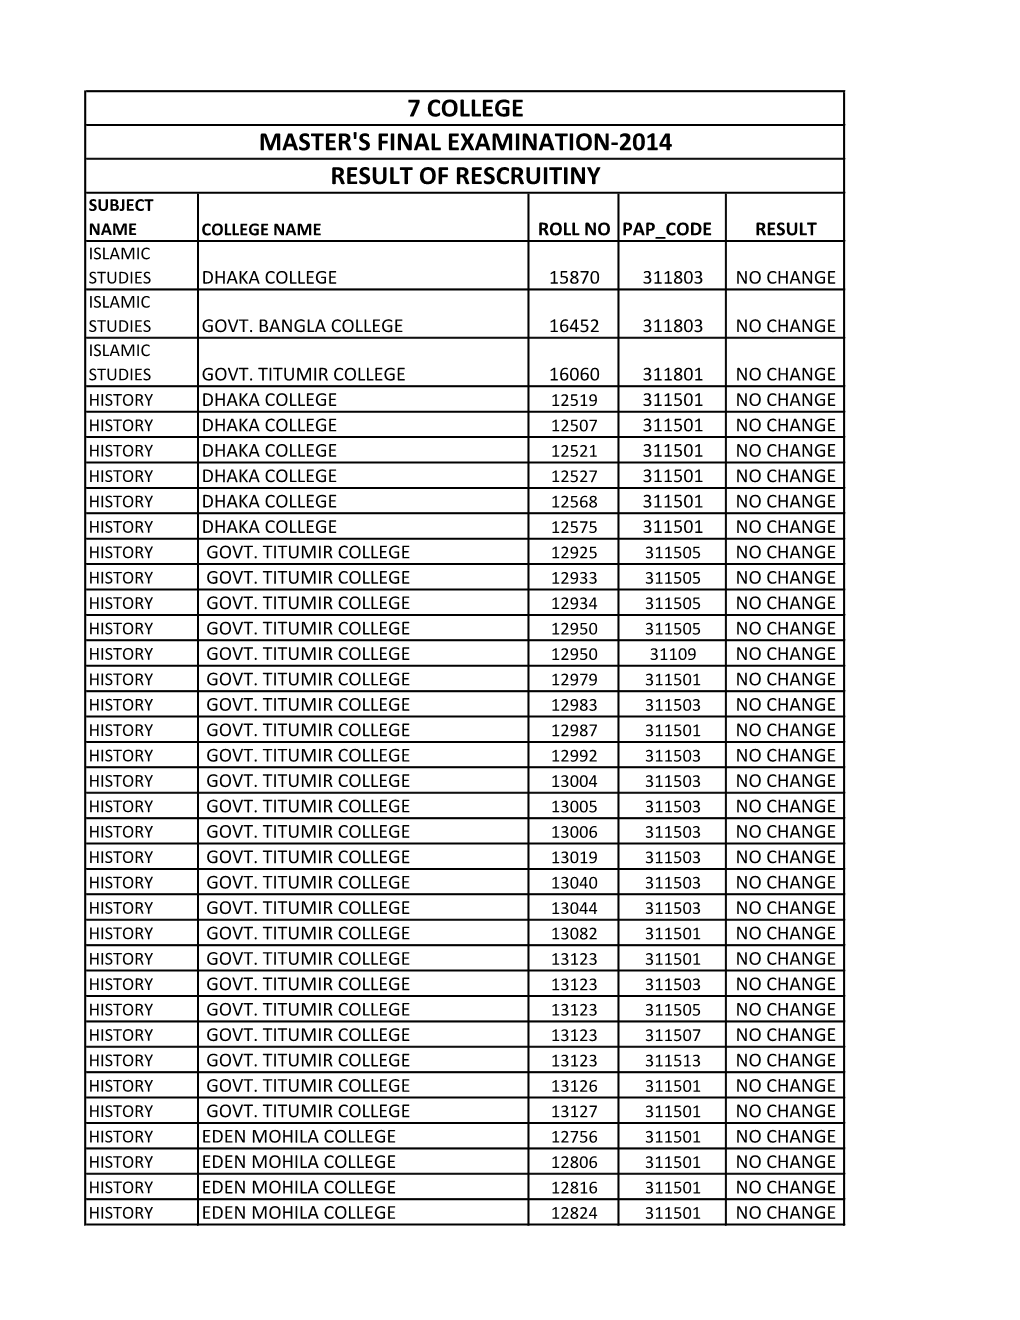 7 College Master's Final Examination-2014 Result Of